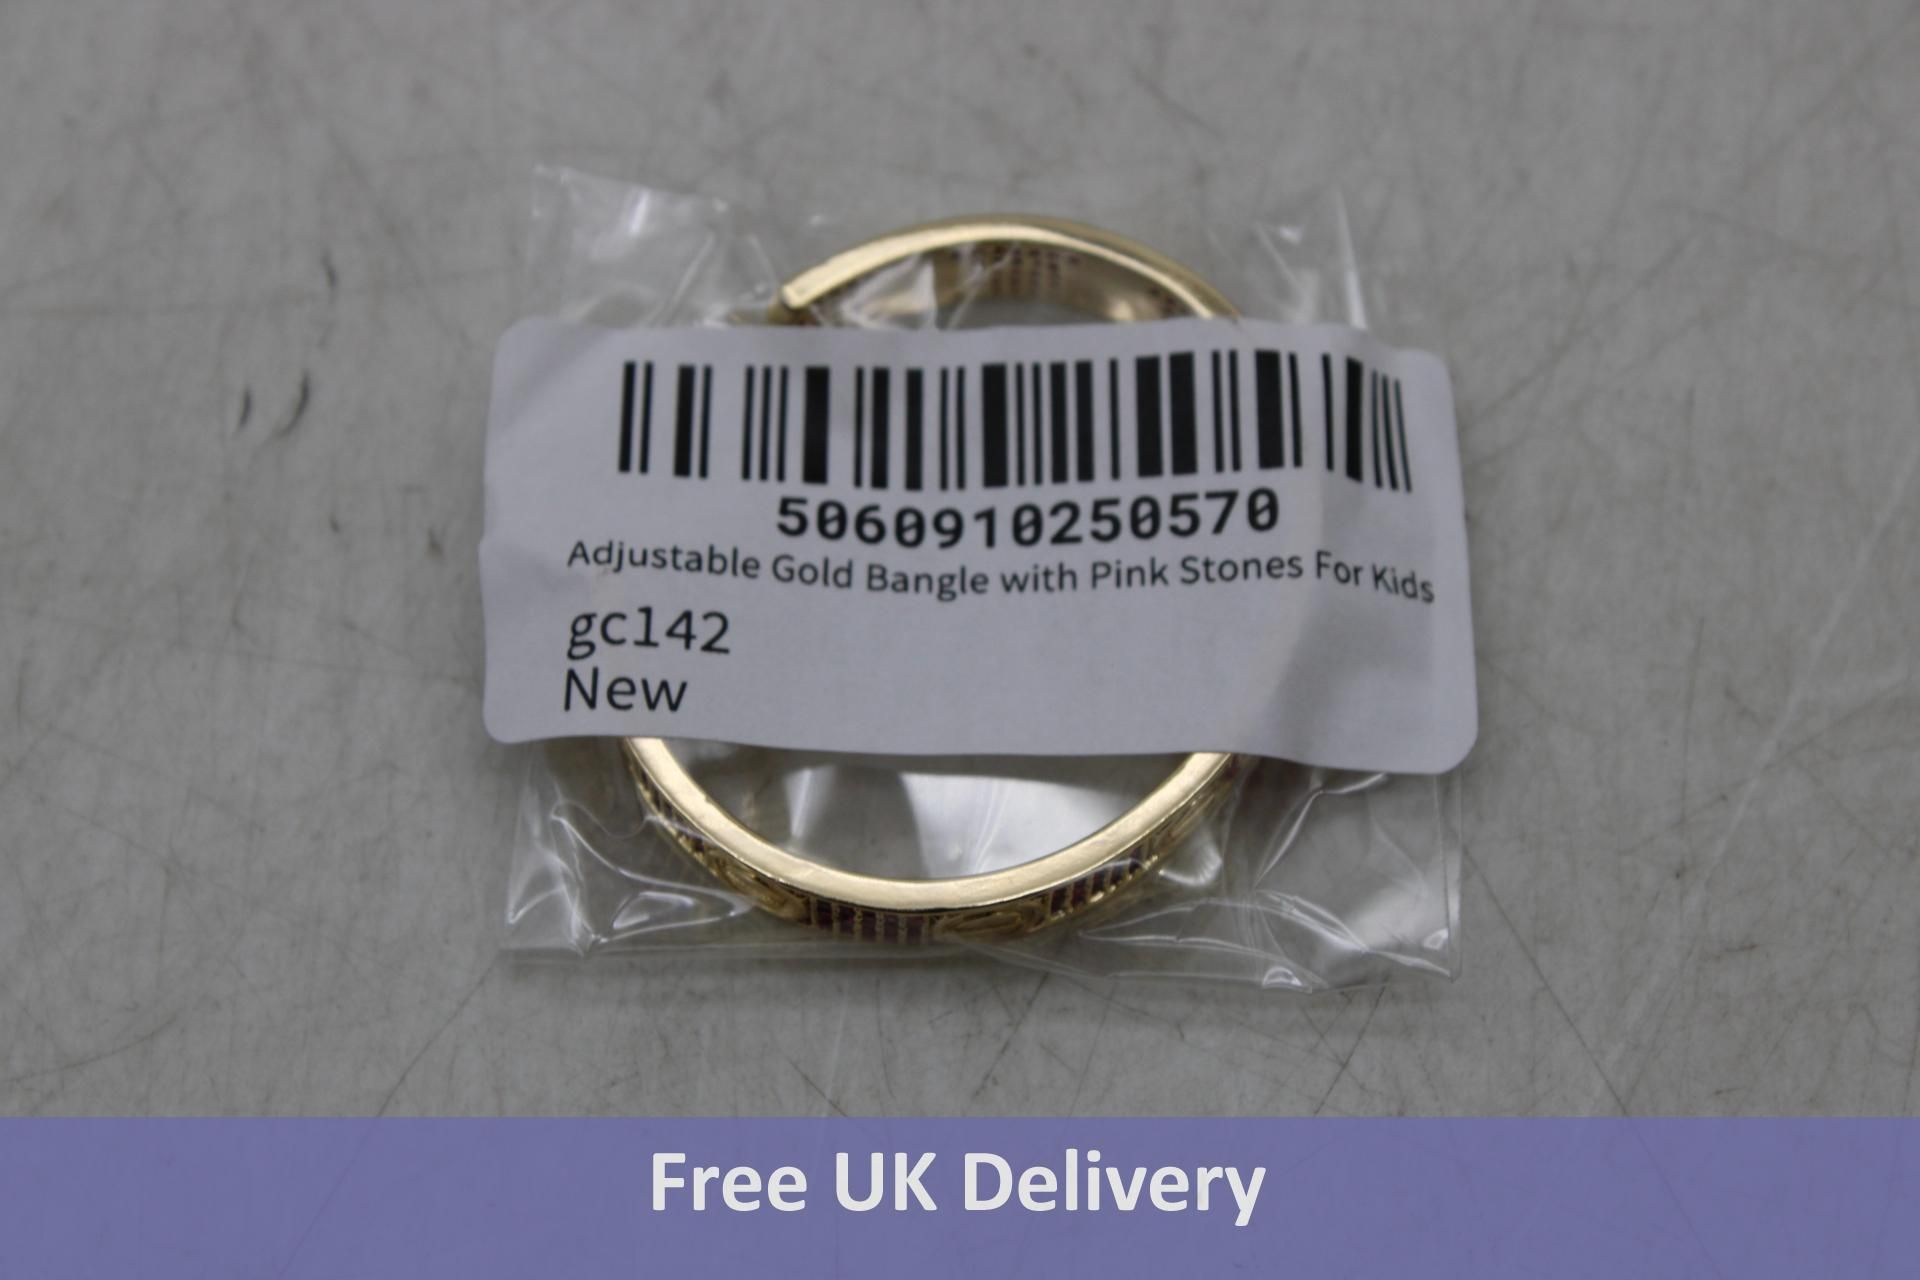 Four Adjustable Kids Bangles with Pink Stones, Gold Colour, GC142 - Image 2 of 4